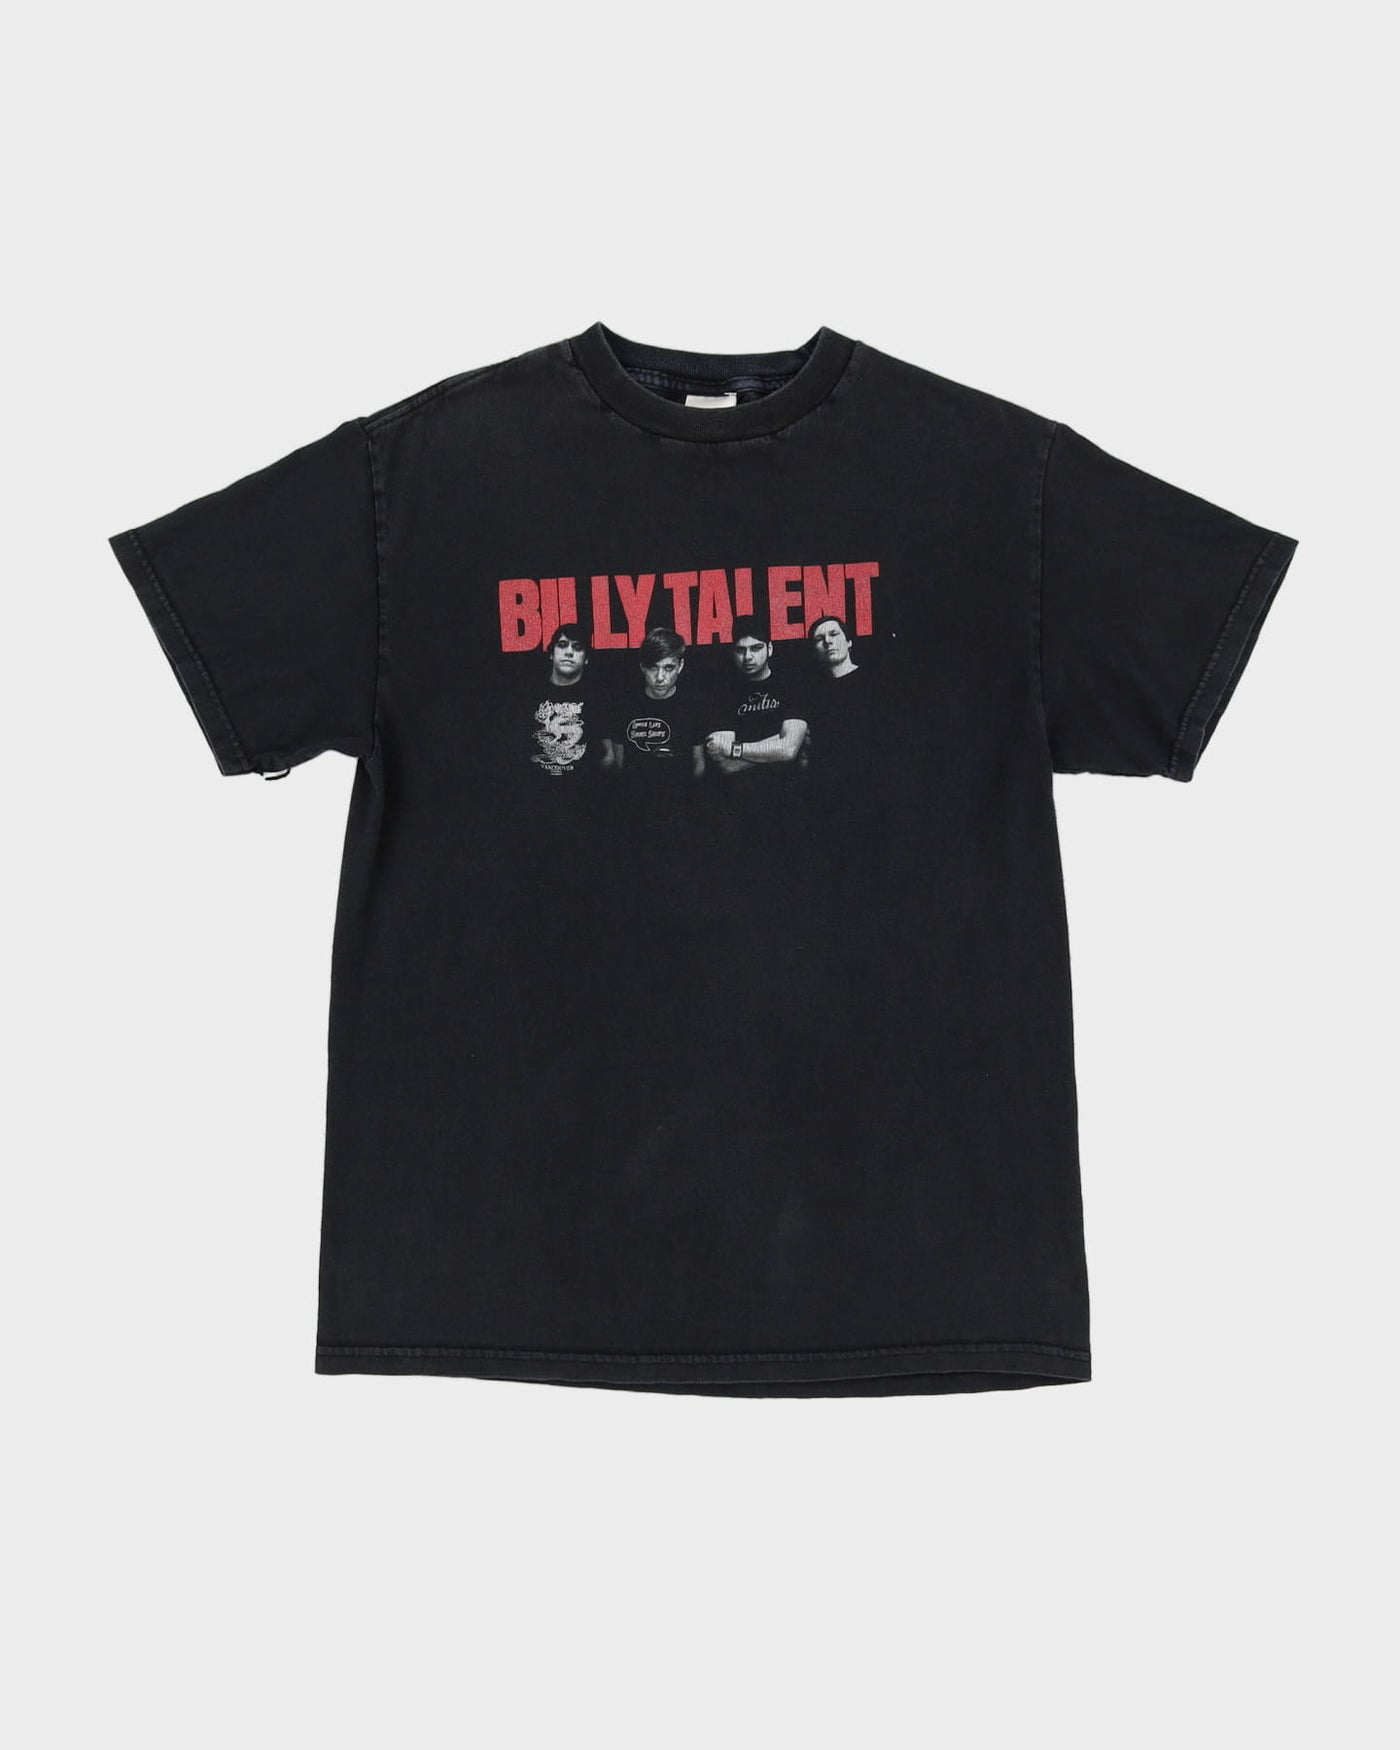 00s Billy Talent Black Graphic Band T-Shirt - M